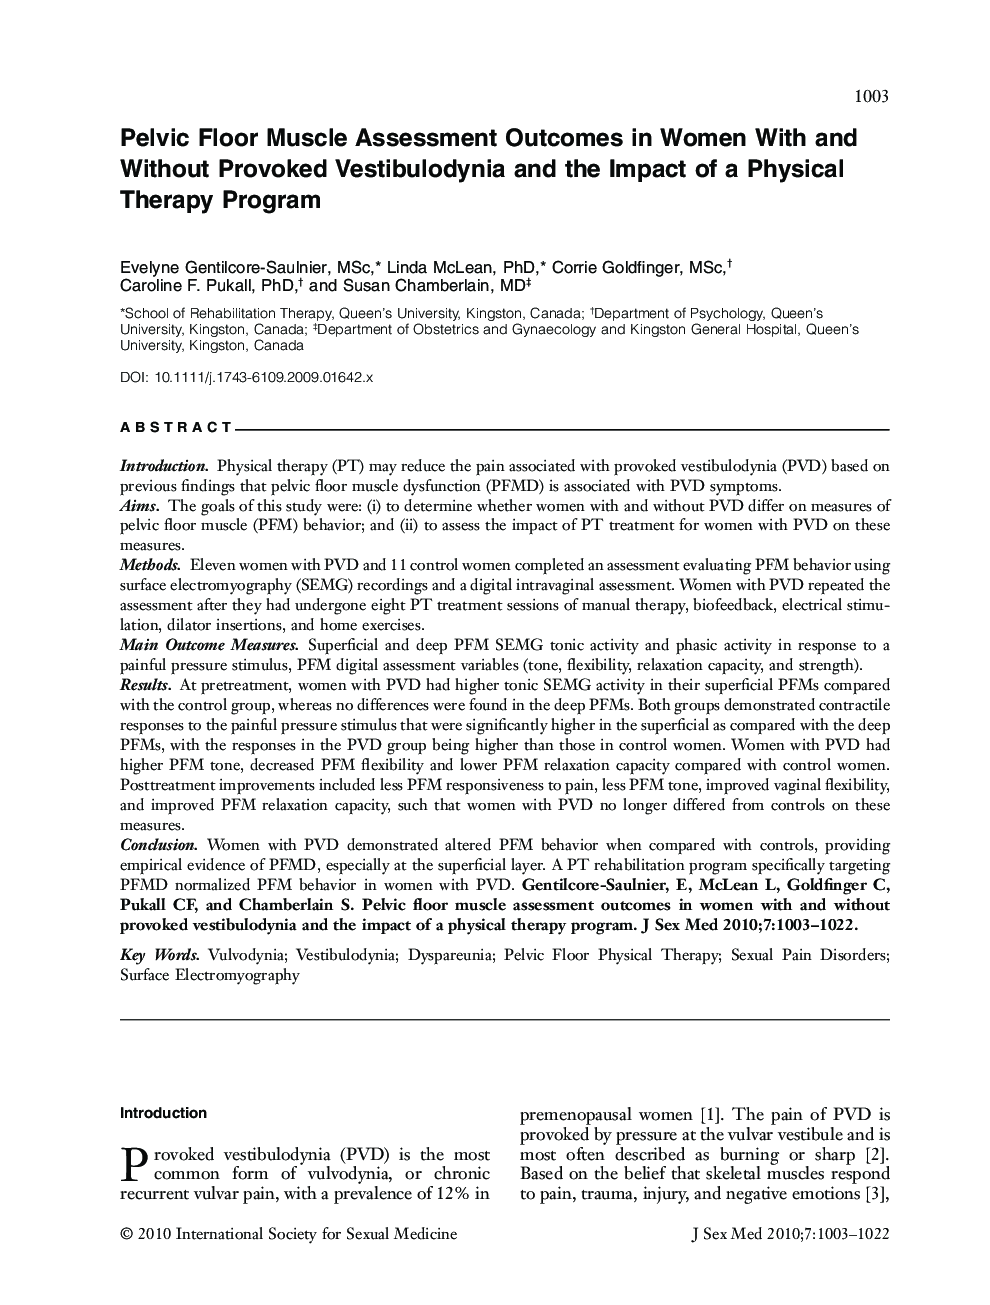 Pelvic Floor Muscle Assessment Outcomes in Women With and Without Provoked Vestibulodynia and the Impact of a Physical Therapy Program